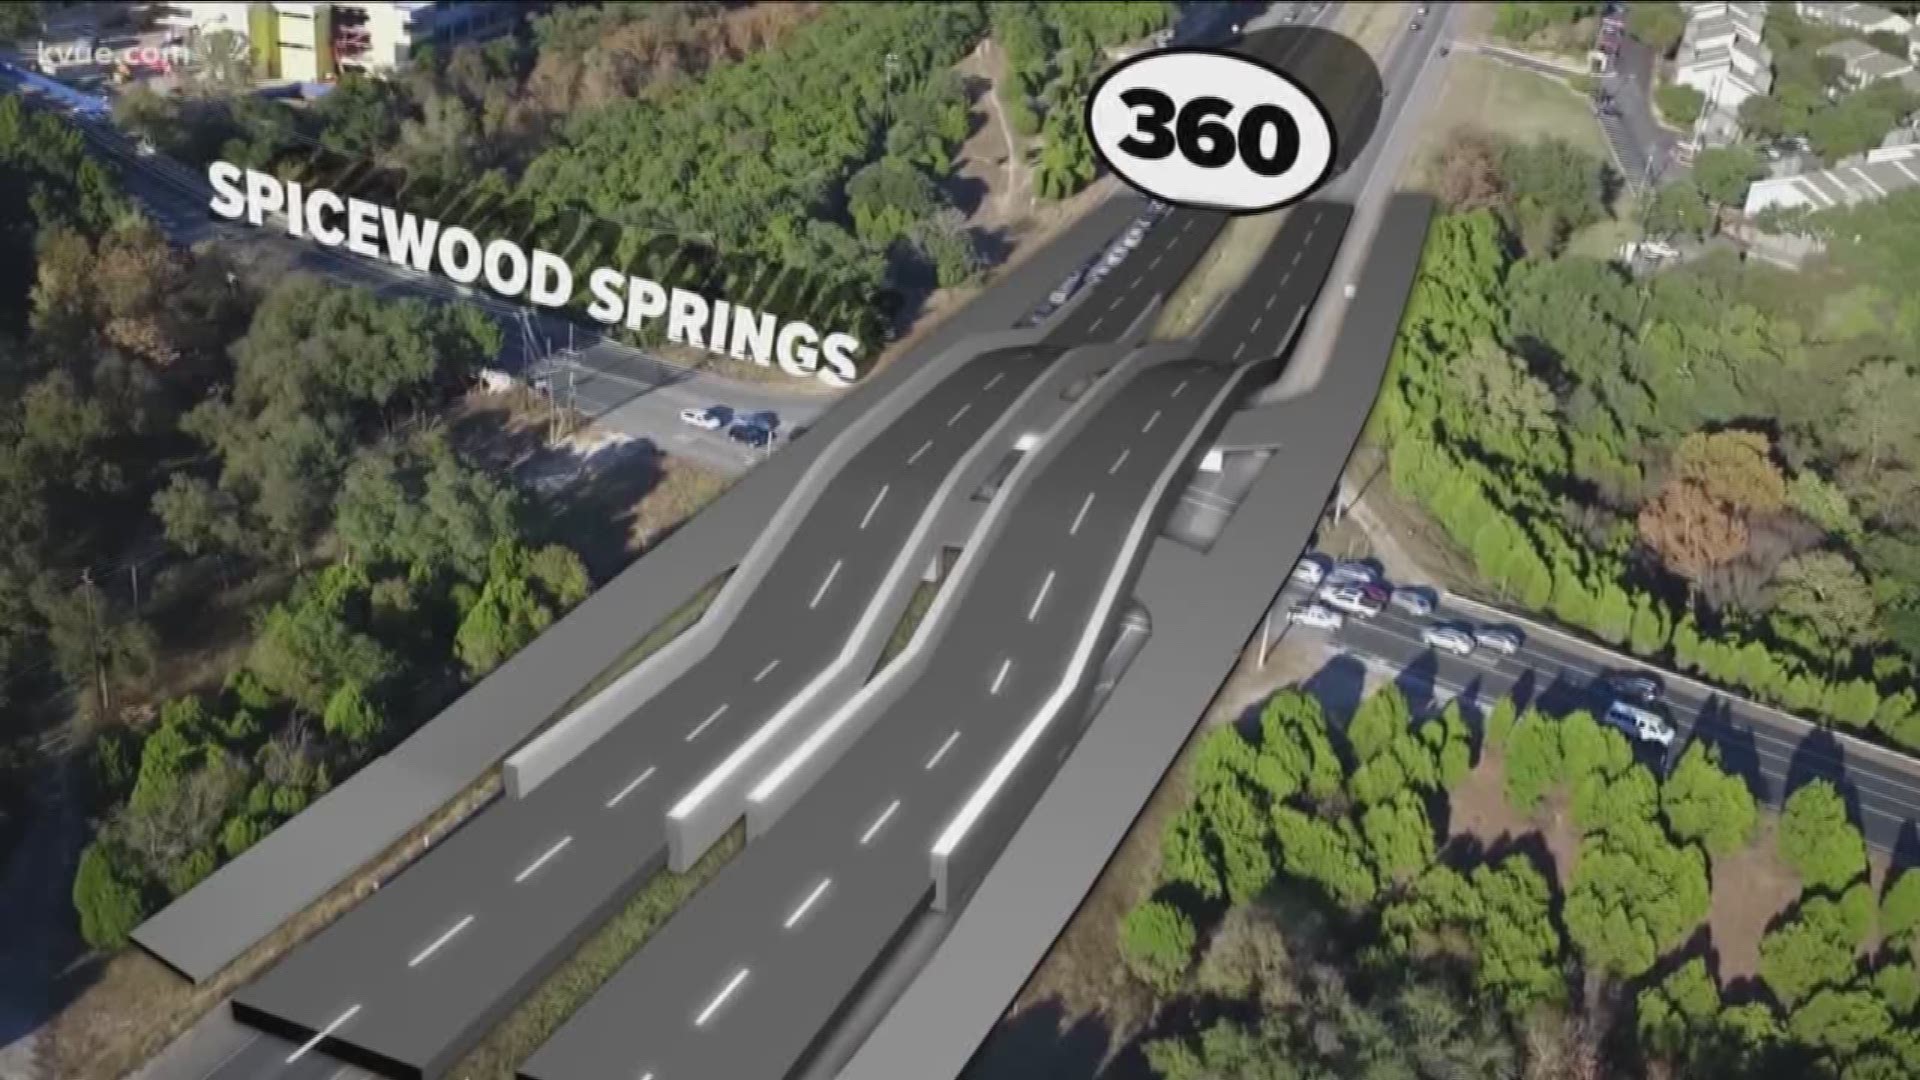 No one enjoys driving bumper to bumper and sitting in Austin traffic.
That's why the Texas Department of Transportation is working to help alleviate some of that. They said the 360 corridor includes some of the state's most congested roadways.